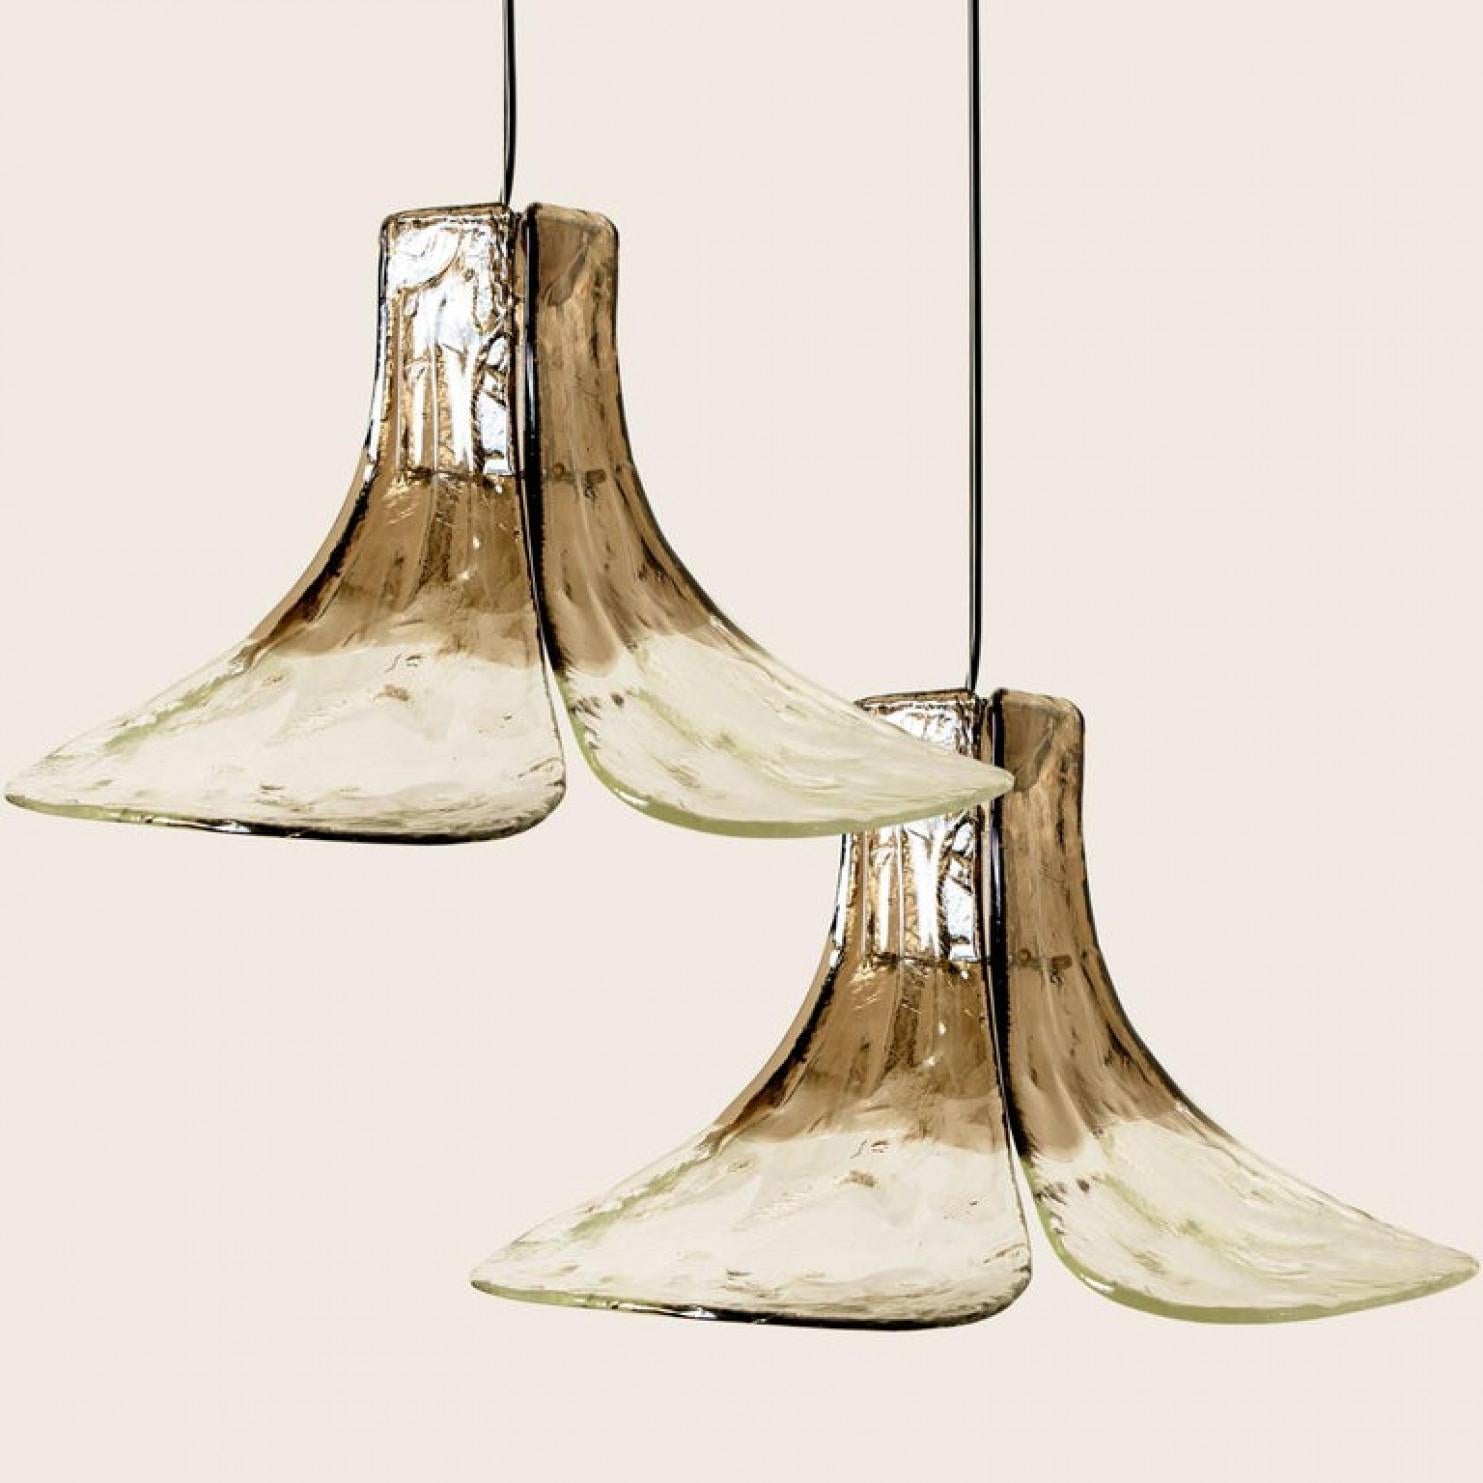 1 of the 2 pendant lamps by Carlo Nason for Mazzega.
Four crystal clear and smoked leaves compose this beautiful piece made in thick handmade Murano glass.

Measures: H 16.93” (43 cm), D 23.62